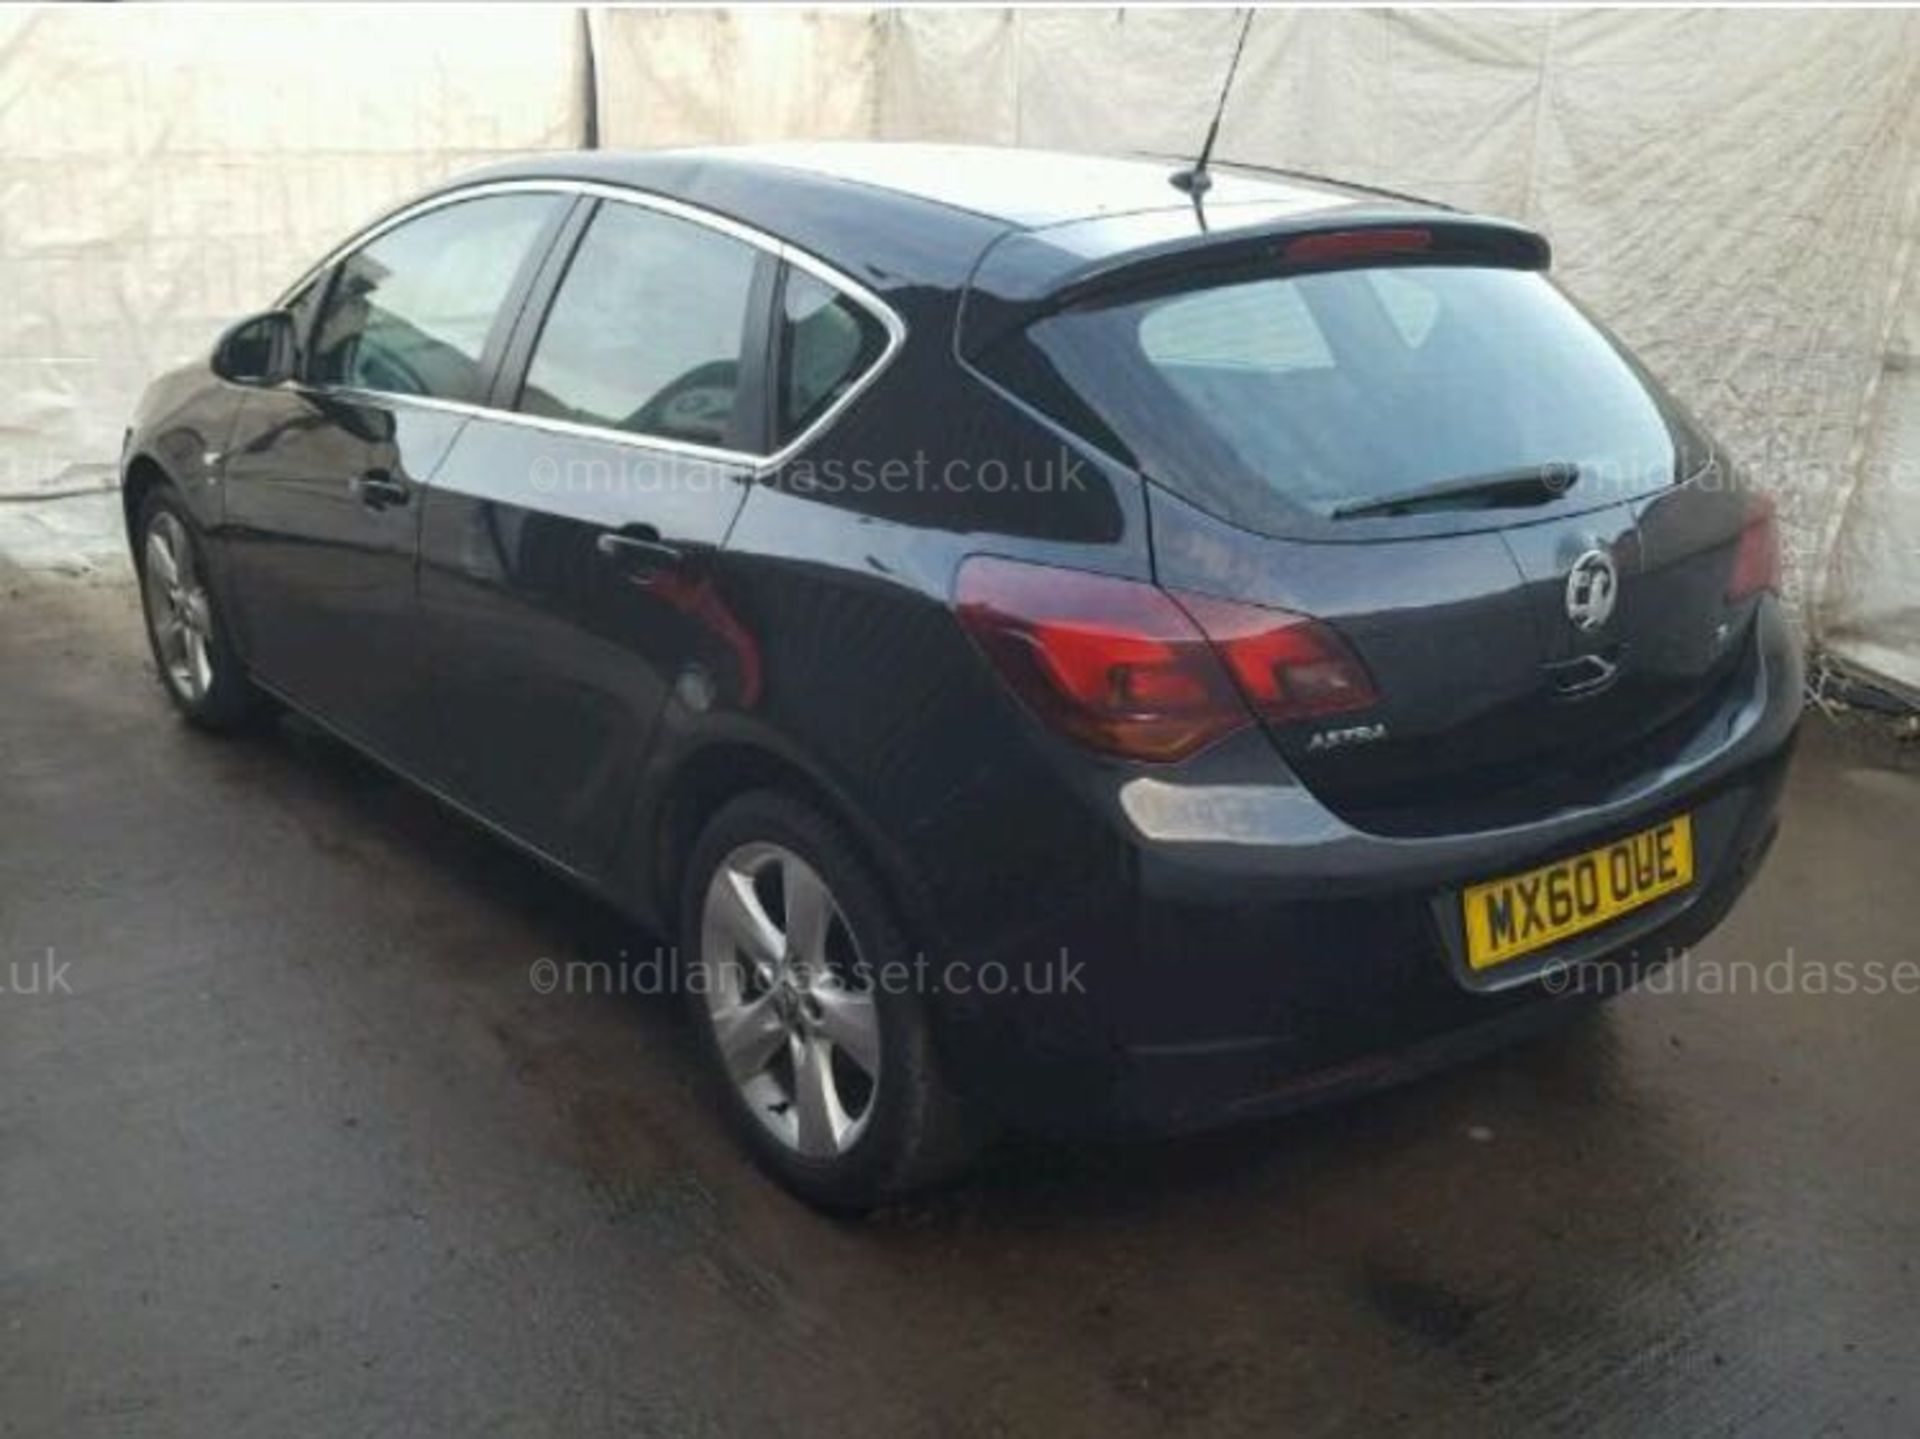 2010/60 REG VAUXHALL ASTRA SRI AUTO 5 DOOR HATCHBACK TWO FORMER KEEPERS *NO VAT*   DATE OF - Image 2 of 8